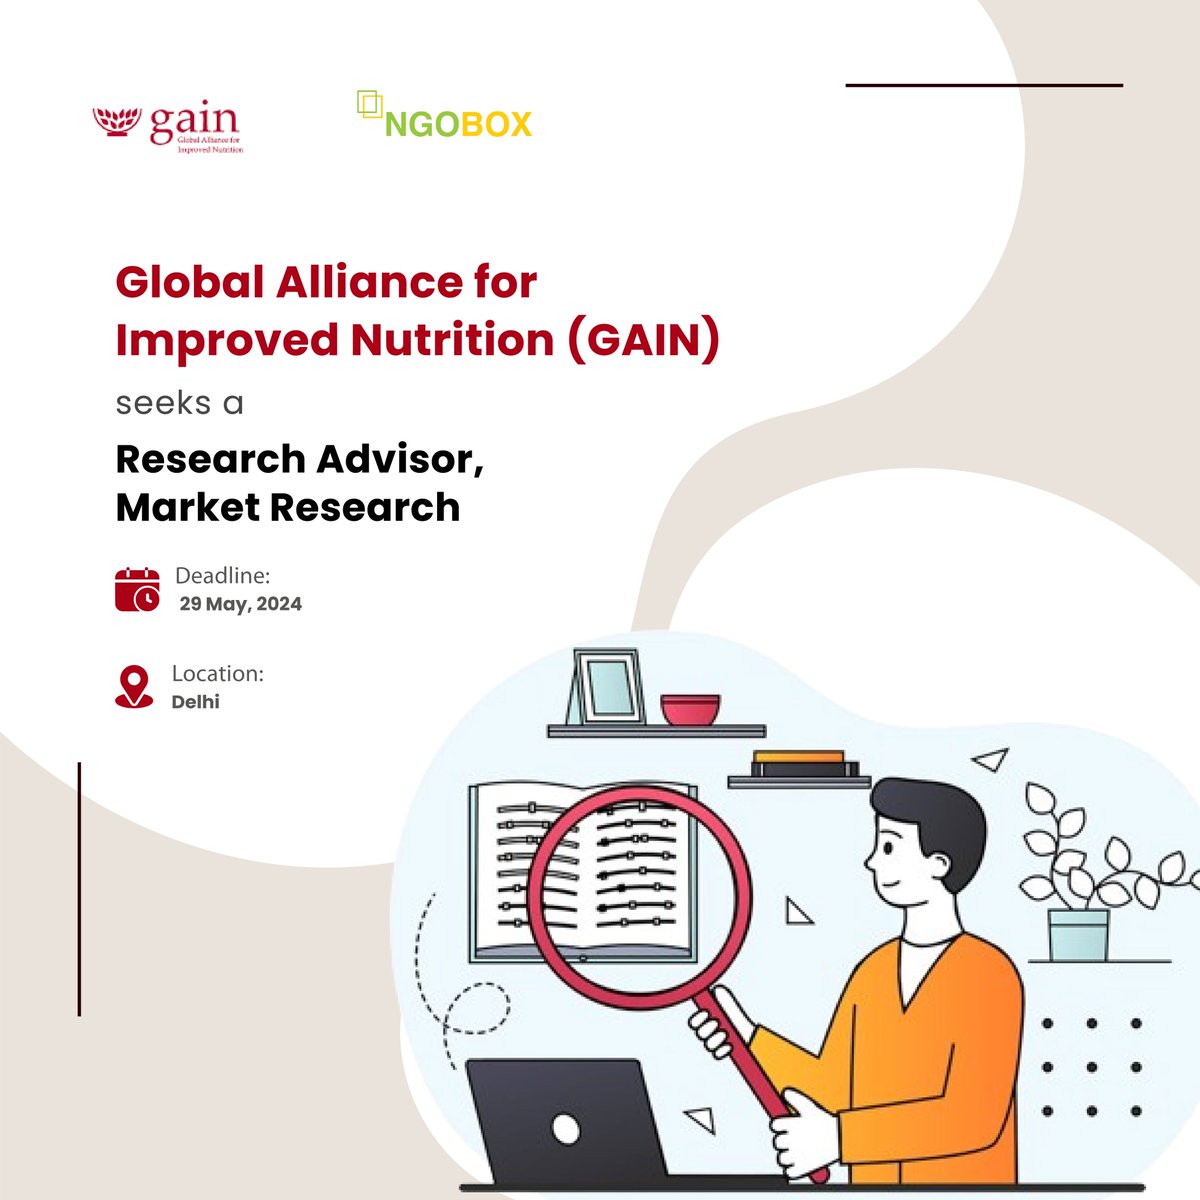 #JobOpening The Global Alliance for Improved Nutrition (GAIN) is seeking a Research Advisor, Market Research to manage the design and implementation of research and learning initiatives in supporting GAIN programming. Apply: ngobox.org/job-detail_Res… #ResearchAdvisor